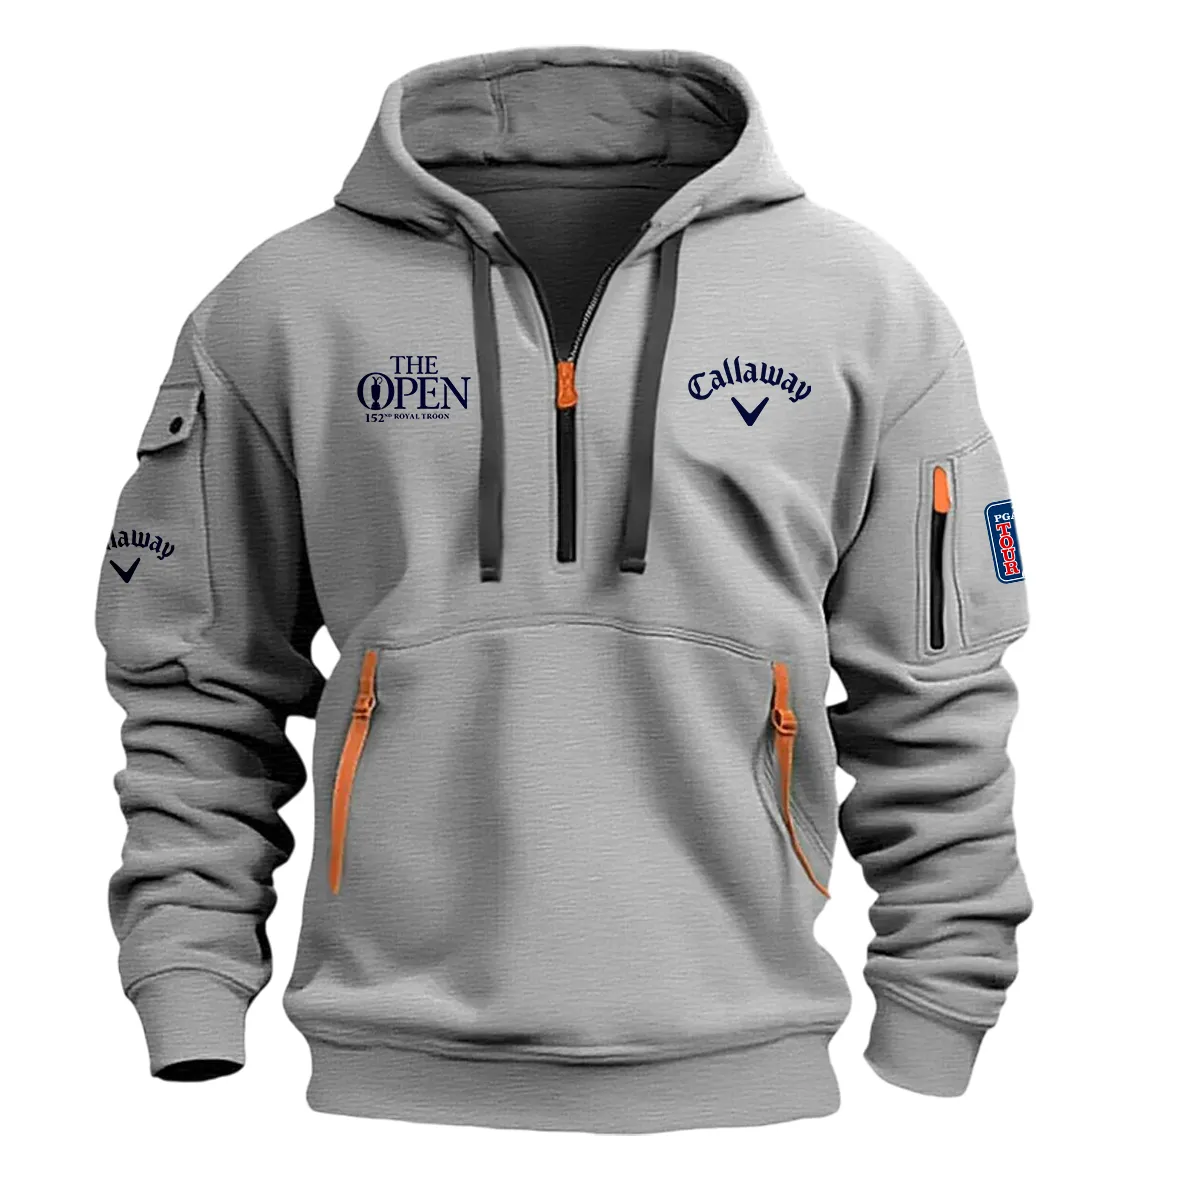 Gray Color Callaway Fashion Hoodie Half Zipper 152nd The Open Championship Gift For Fans